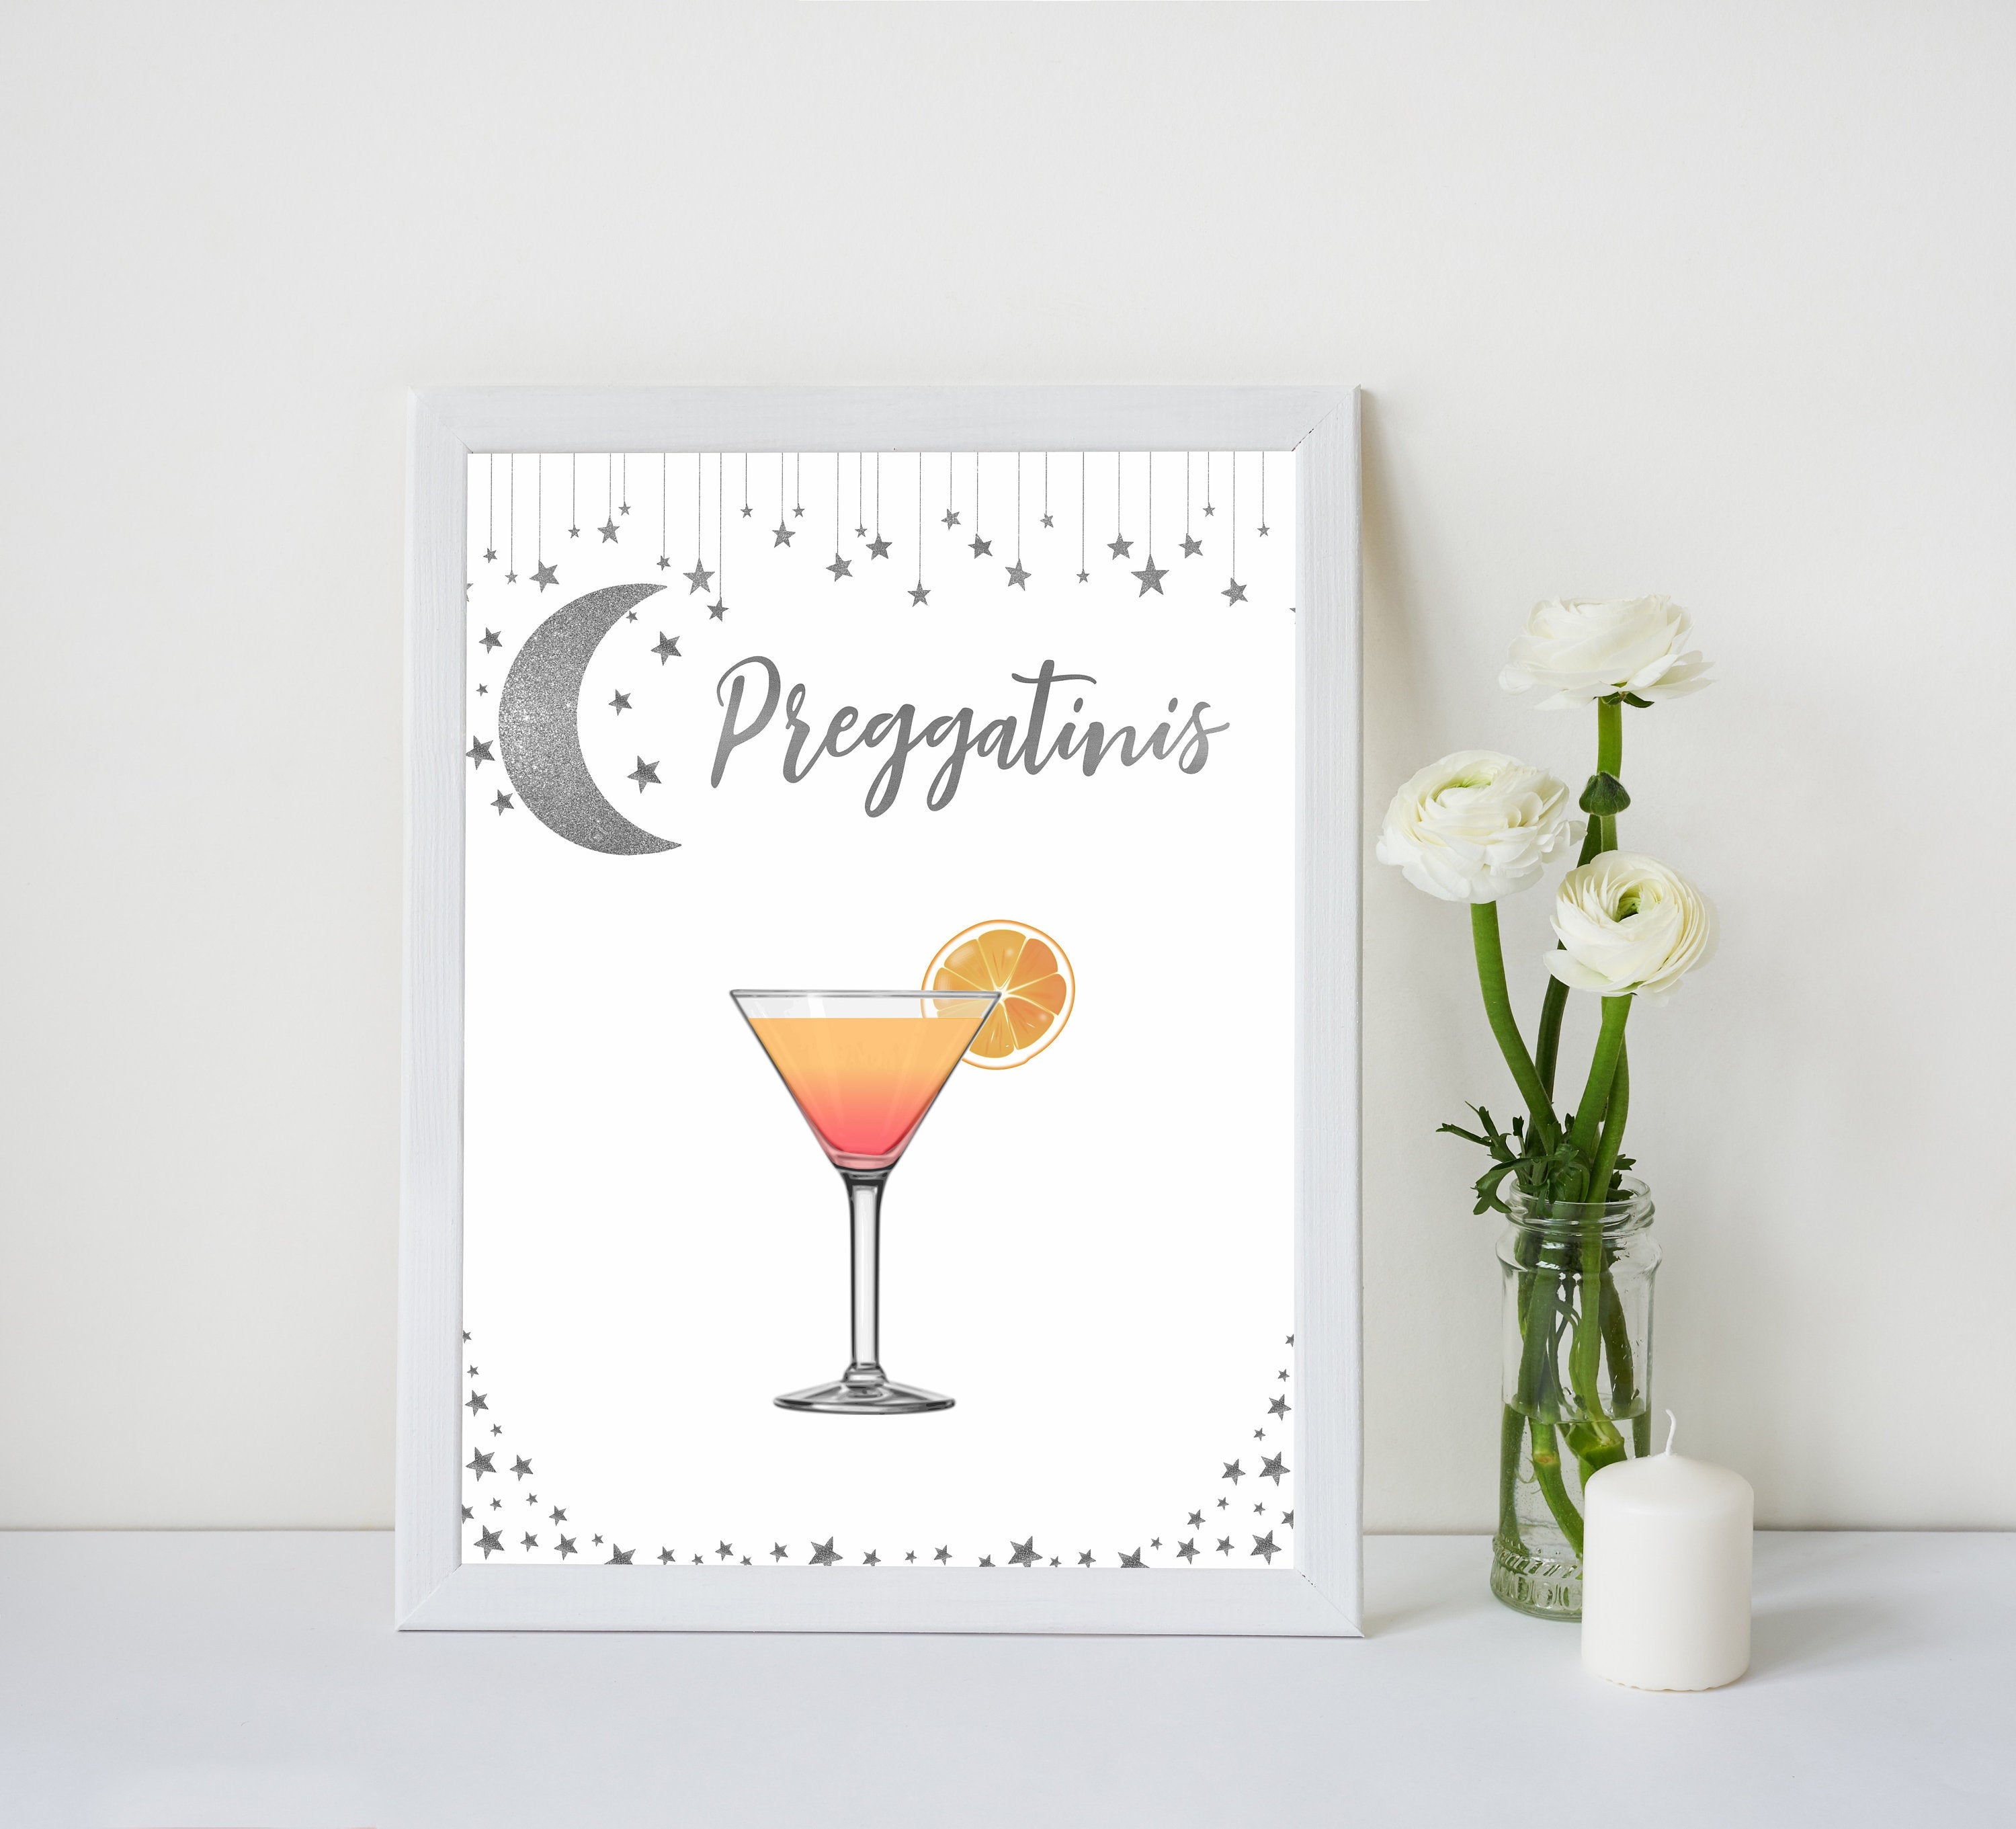 Preggatinis Baby Sign, Little star baby signs, printable baby signs, printable baby decor, twinkle baby shower, star baby decor, fun baby shower ideas, top baby shower themes